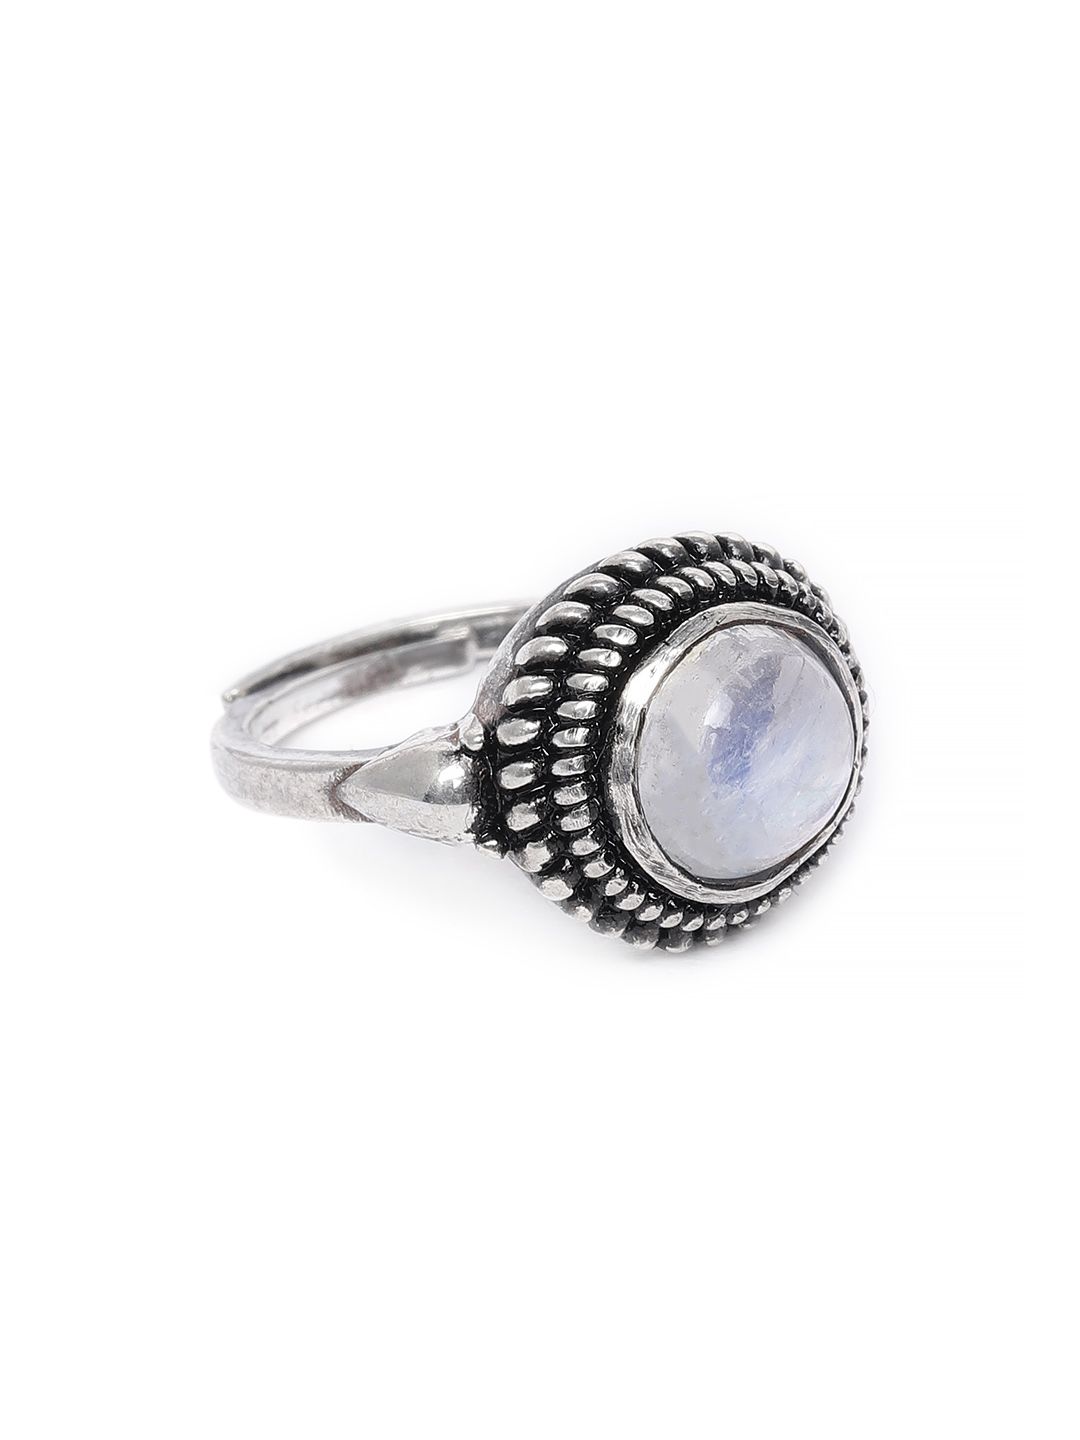 AVNI by GIVA 925 Sterling Silver Oxidised CZ Studded Moonstone Finger Ring Price in India